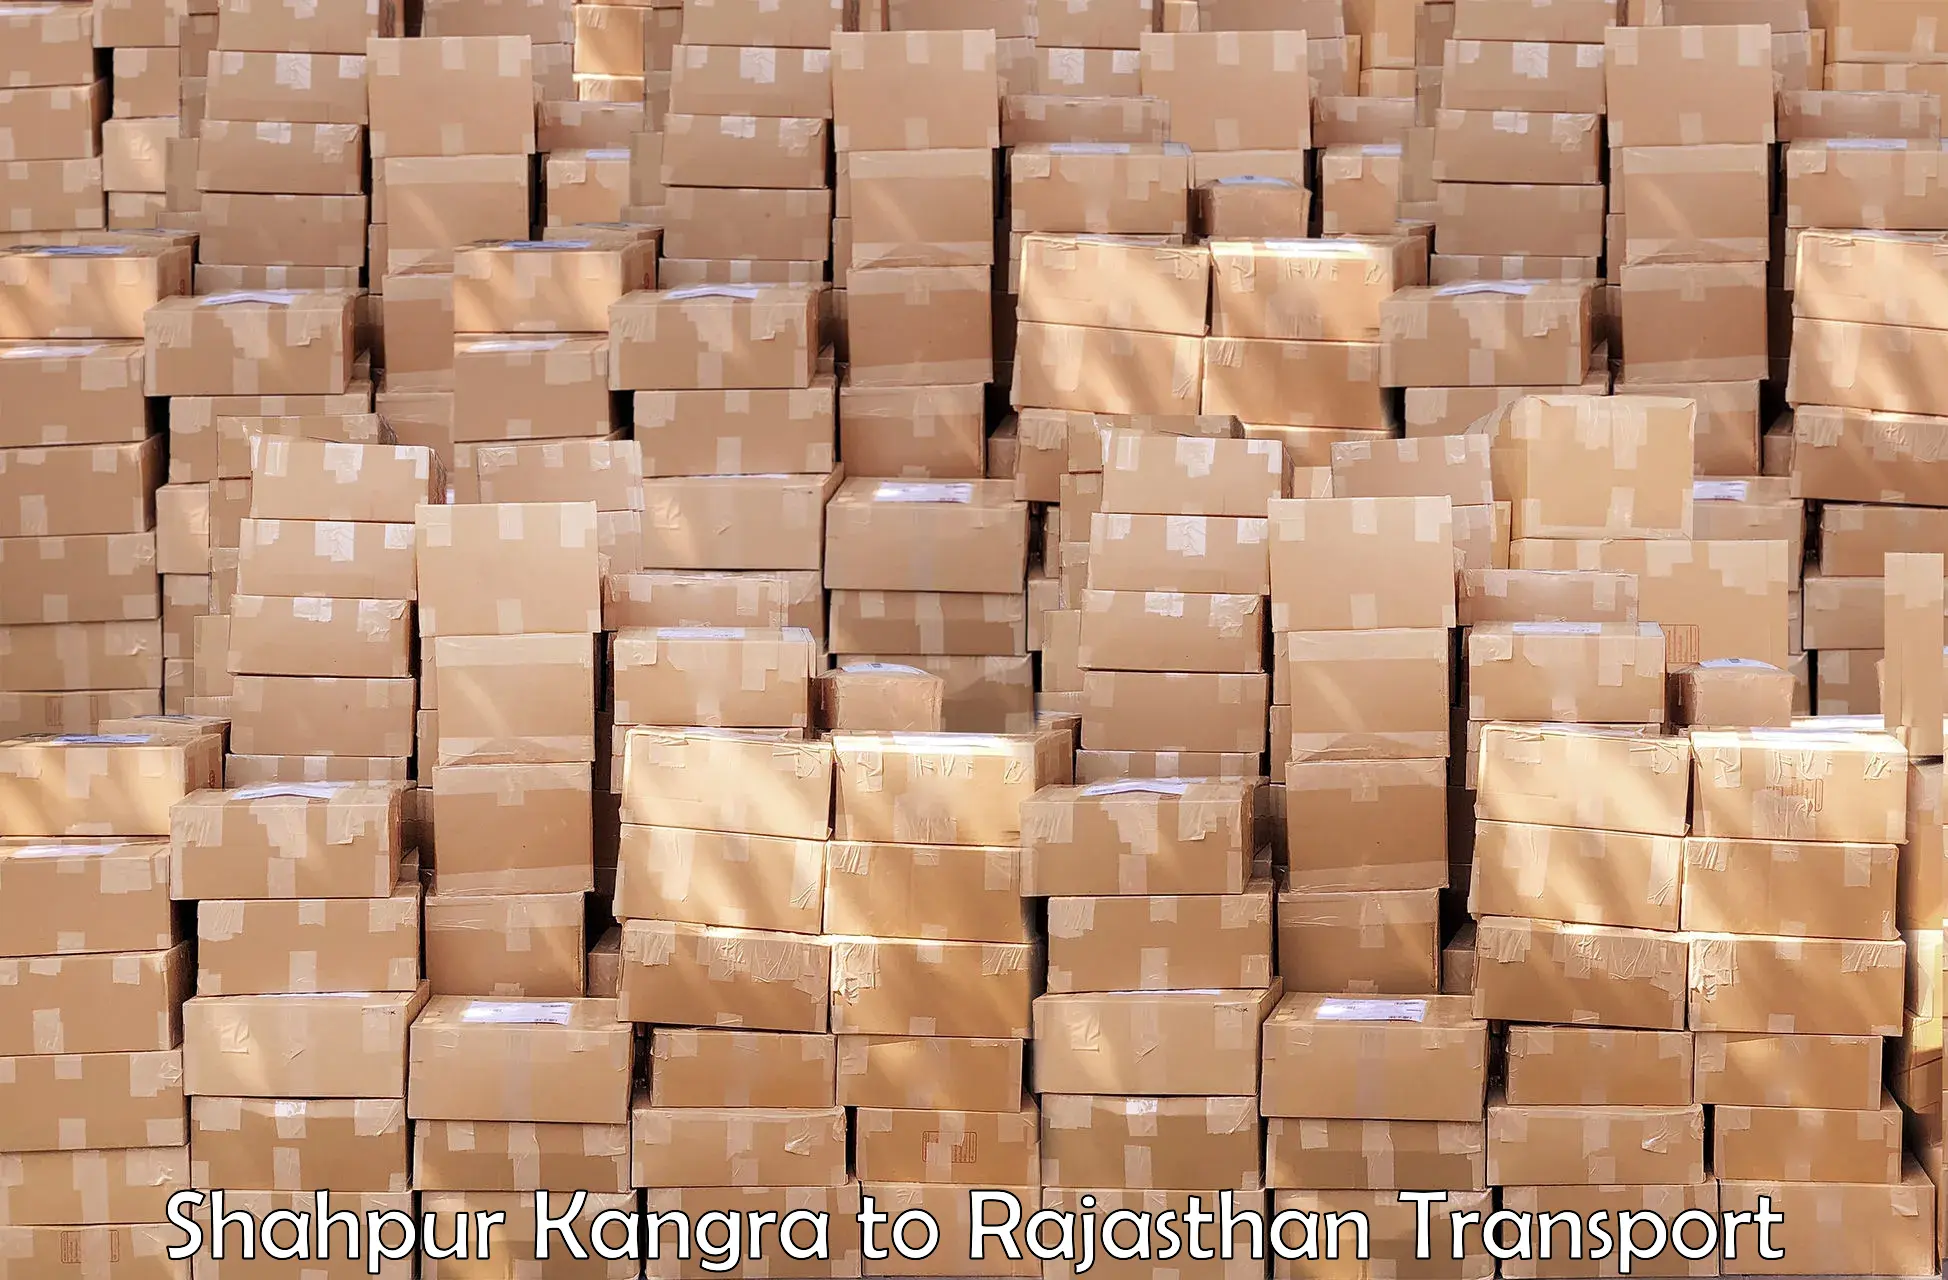 Container transport service Shahpur Kangra to Dholpur